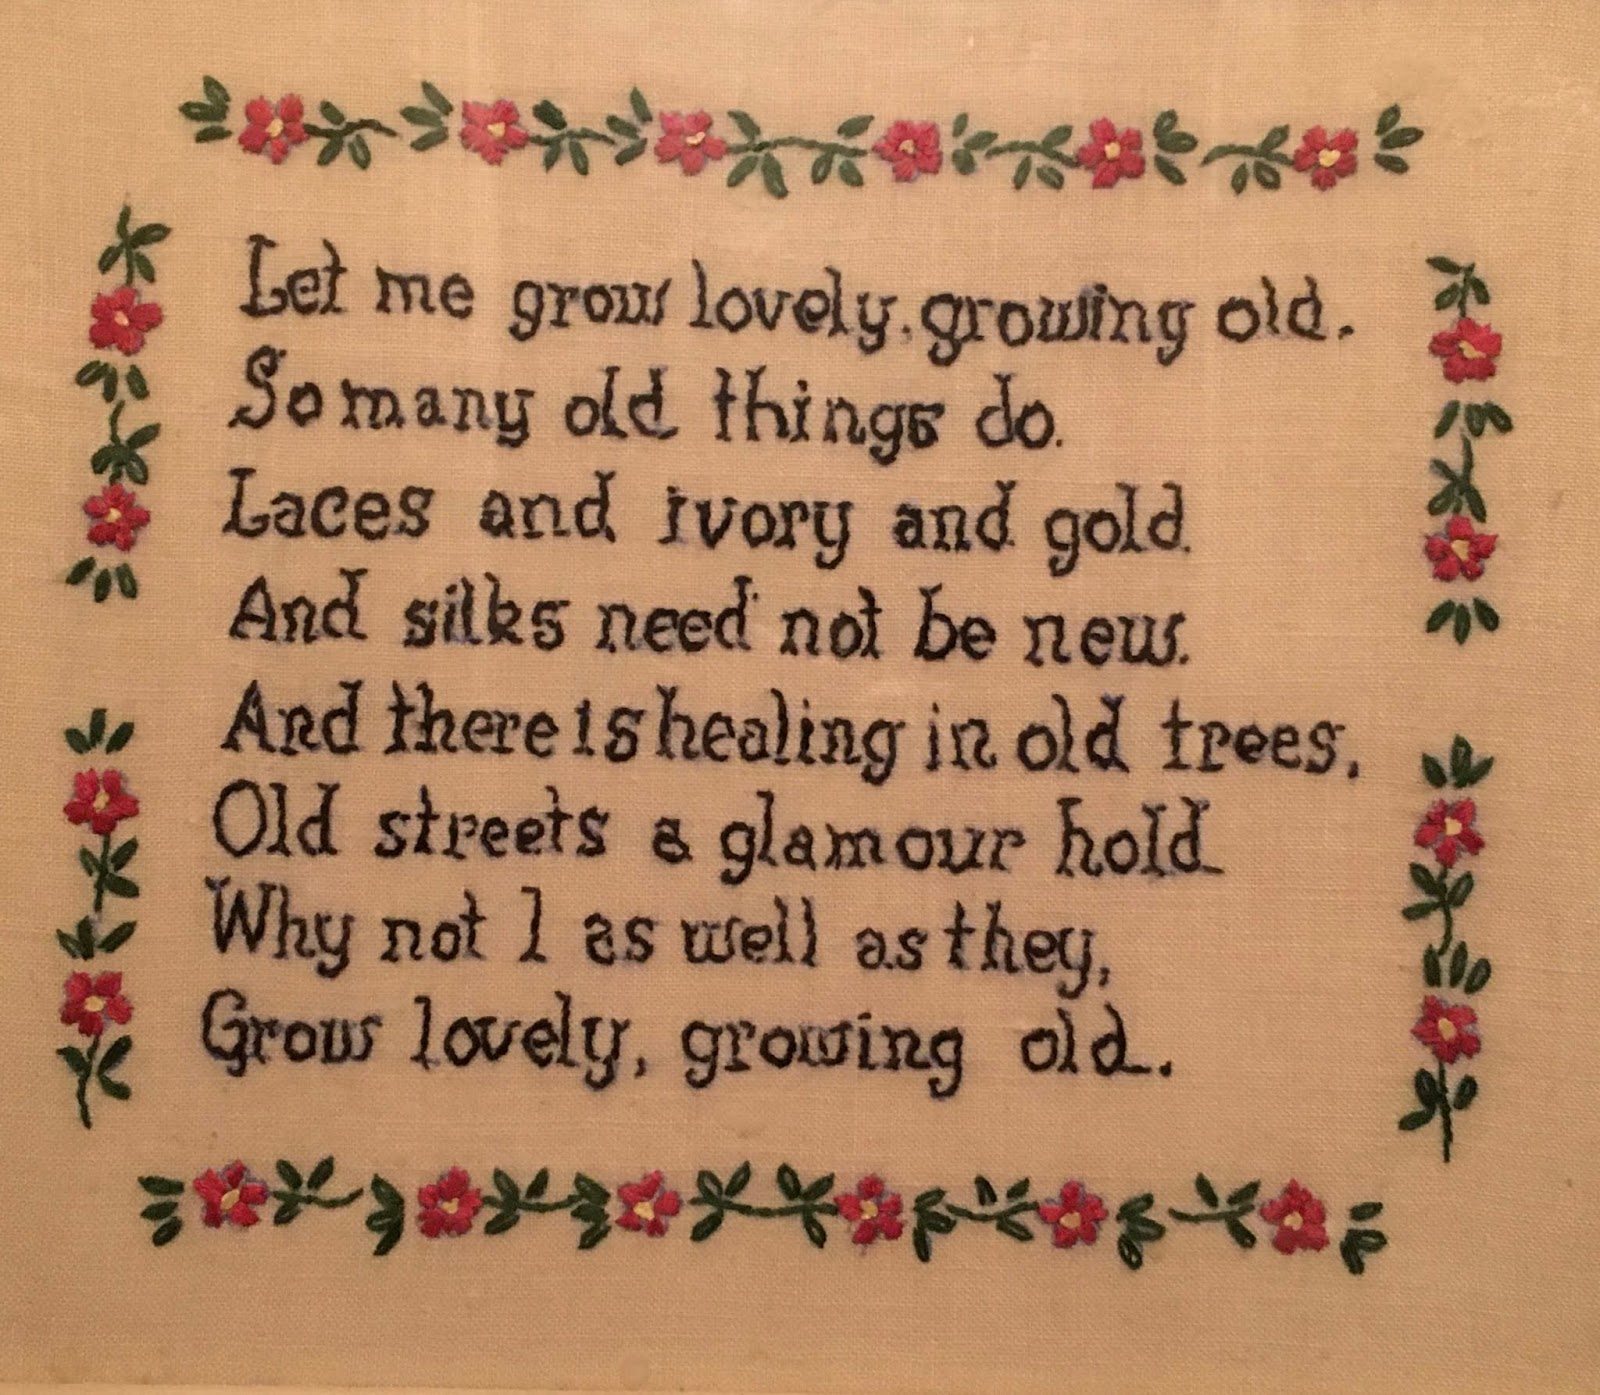 Cross-stitch of Let Me Grow Lovely